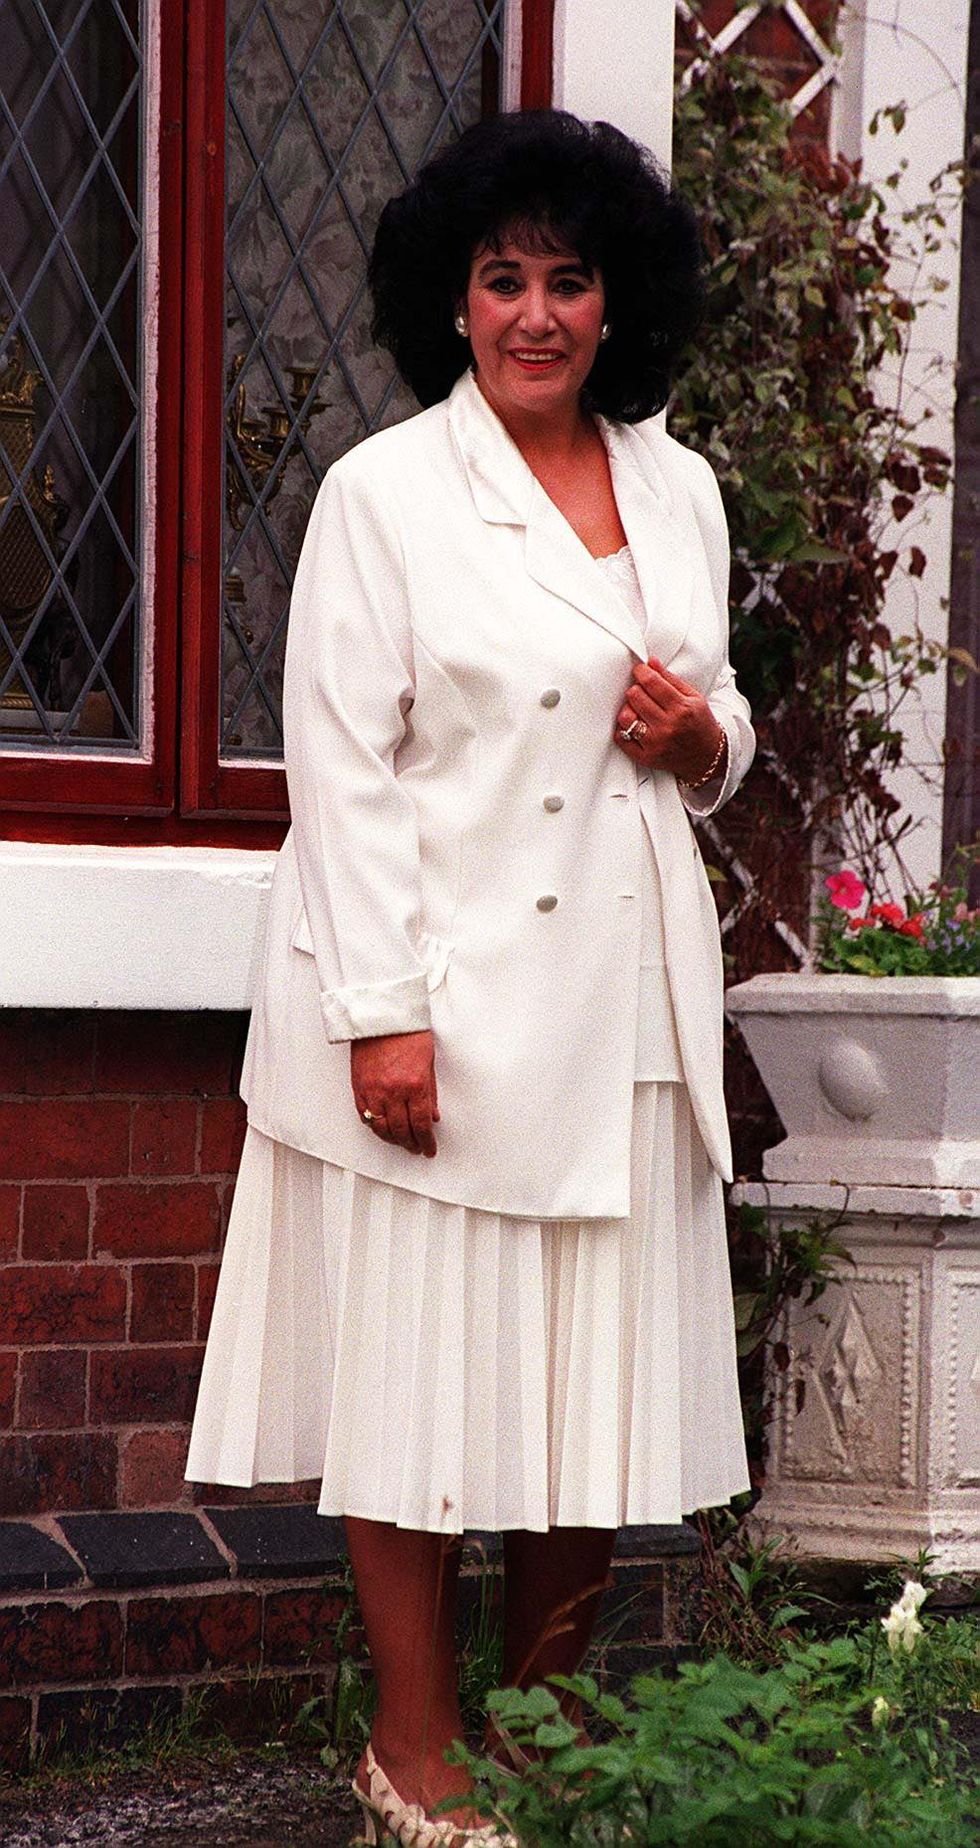 mandatory credit photo by kevin holtdaily mailshutterstock 1138904amystic rita rogers outside her derbyshire home in lower pilsley rita's talents were called upon by diana princess of wales yesterday as she dropped in by harrods helicopter with new love dodi fayed mystic rita rogers outside her derbyshire home in lower pilsley rita's talents were called upon by diana princess of wales yesterday as she dropped in by harrods helicopter with new love dodi fayed